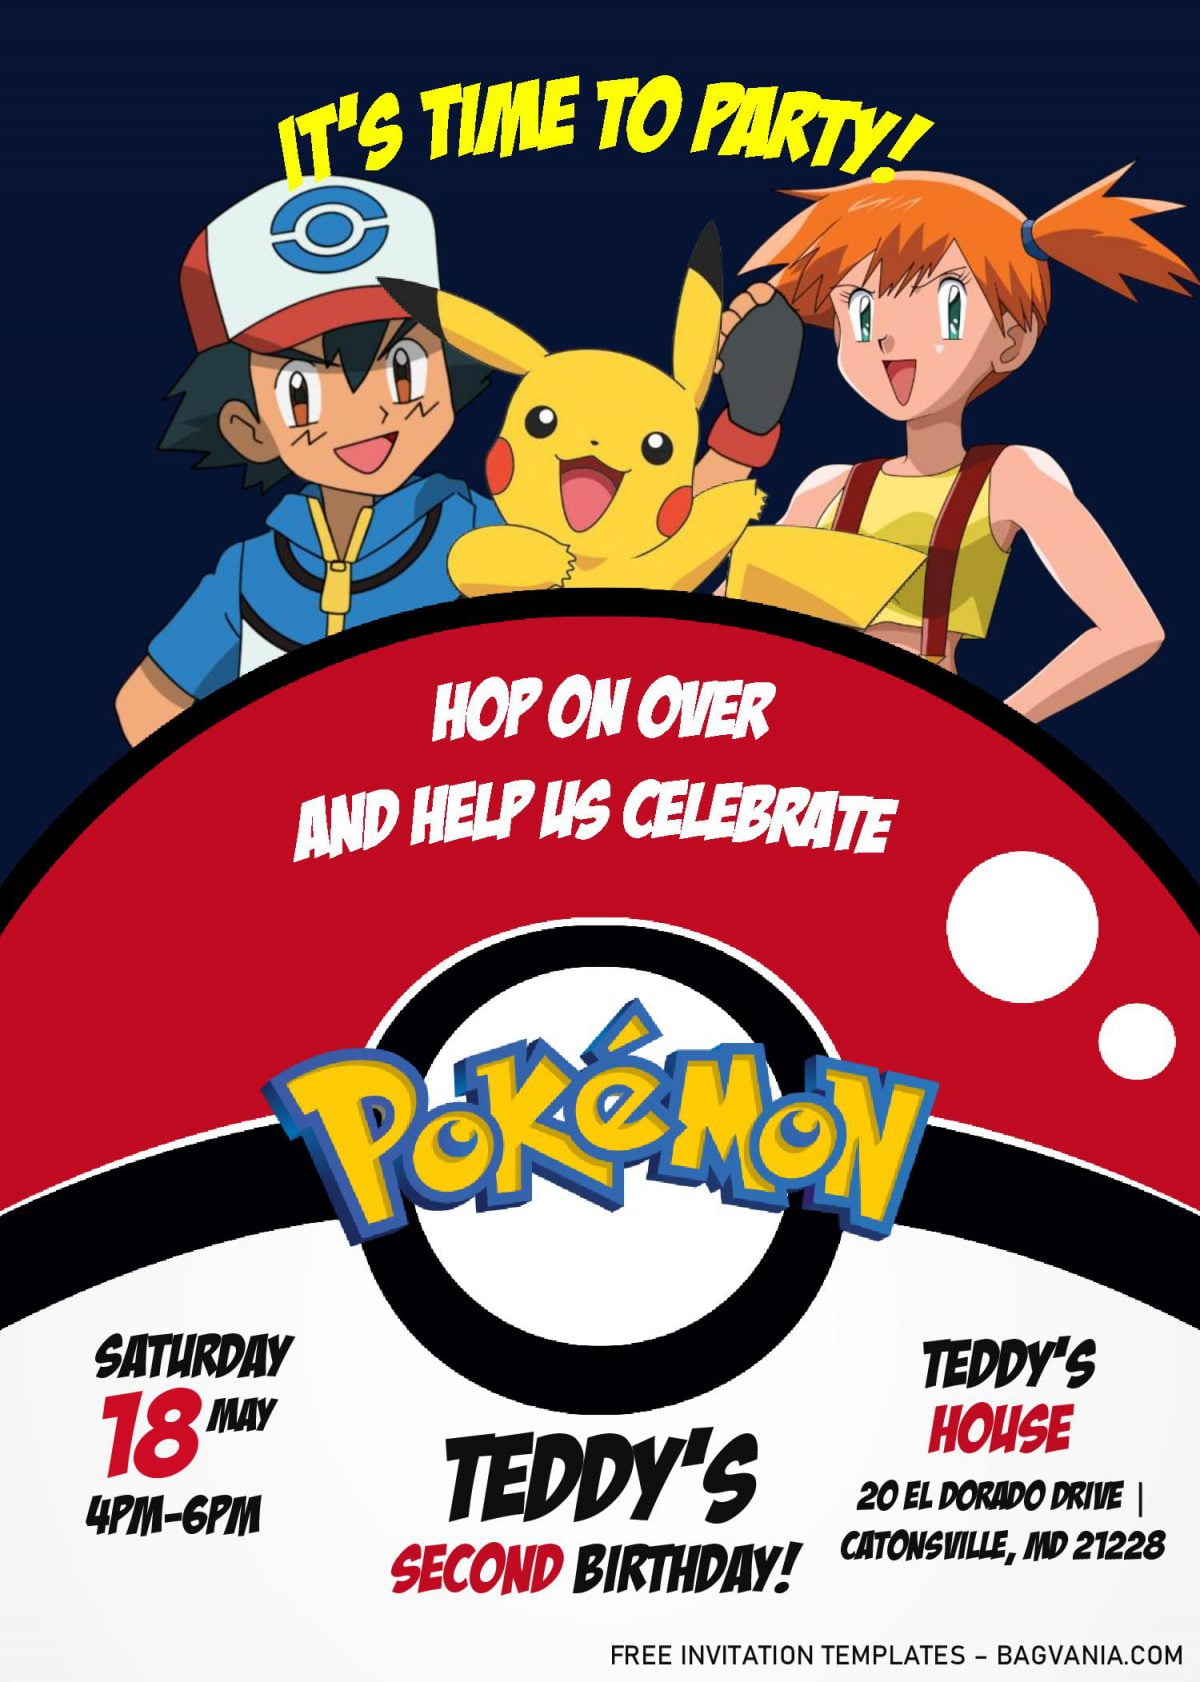 Pokemon Invitation Templates - Editable With MS Word and has misty and poke ball